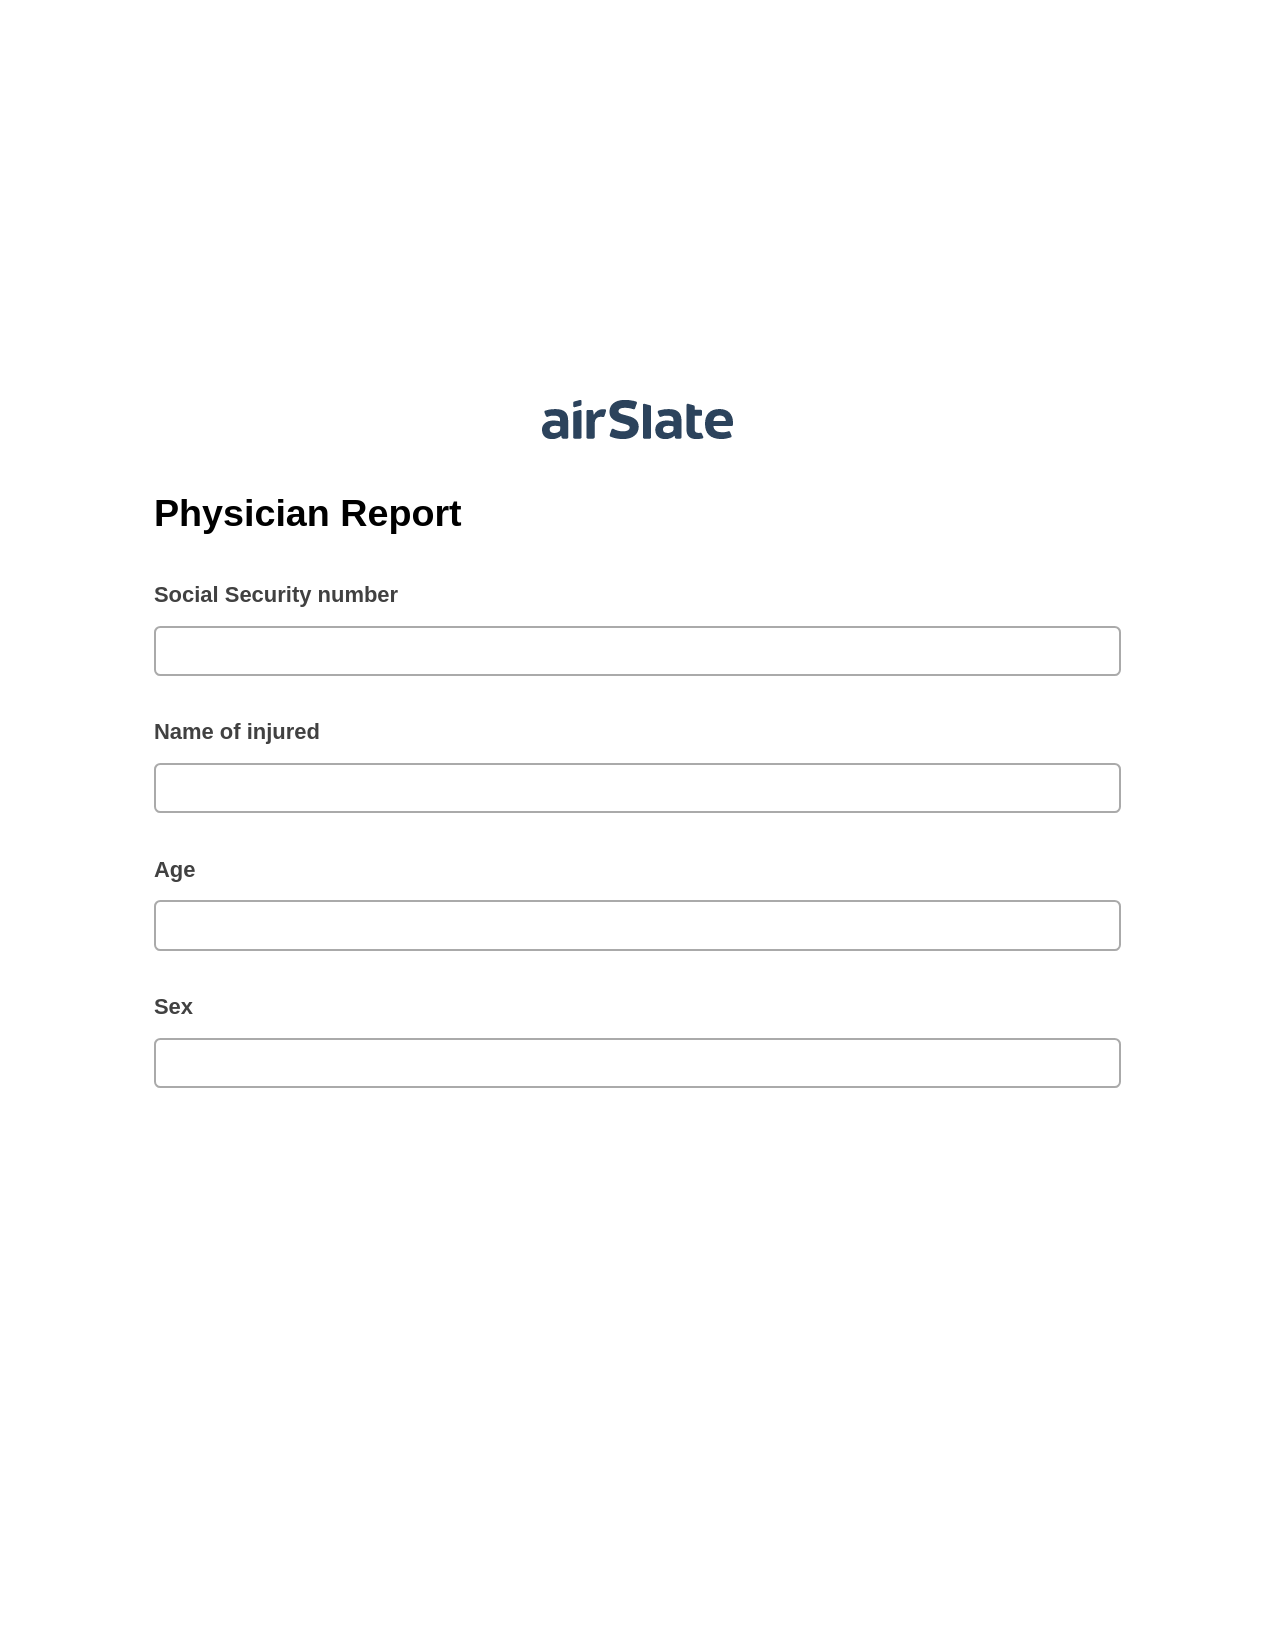 Physician Report Pre-fill from Excel Spreadsheet Bot, Update MS Dynamics 365 Record Bot, Export to Salesforce Record Bot